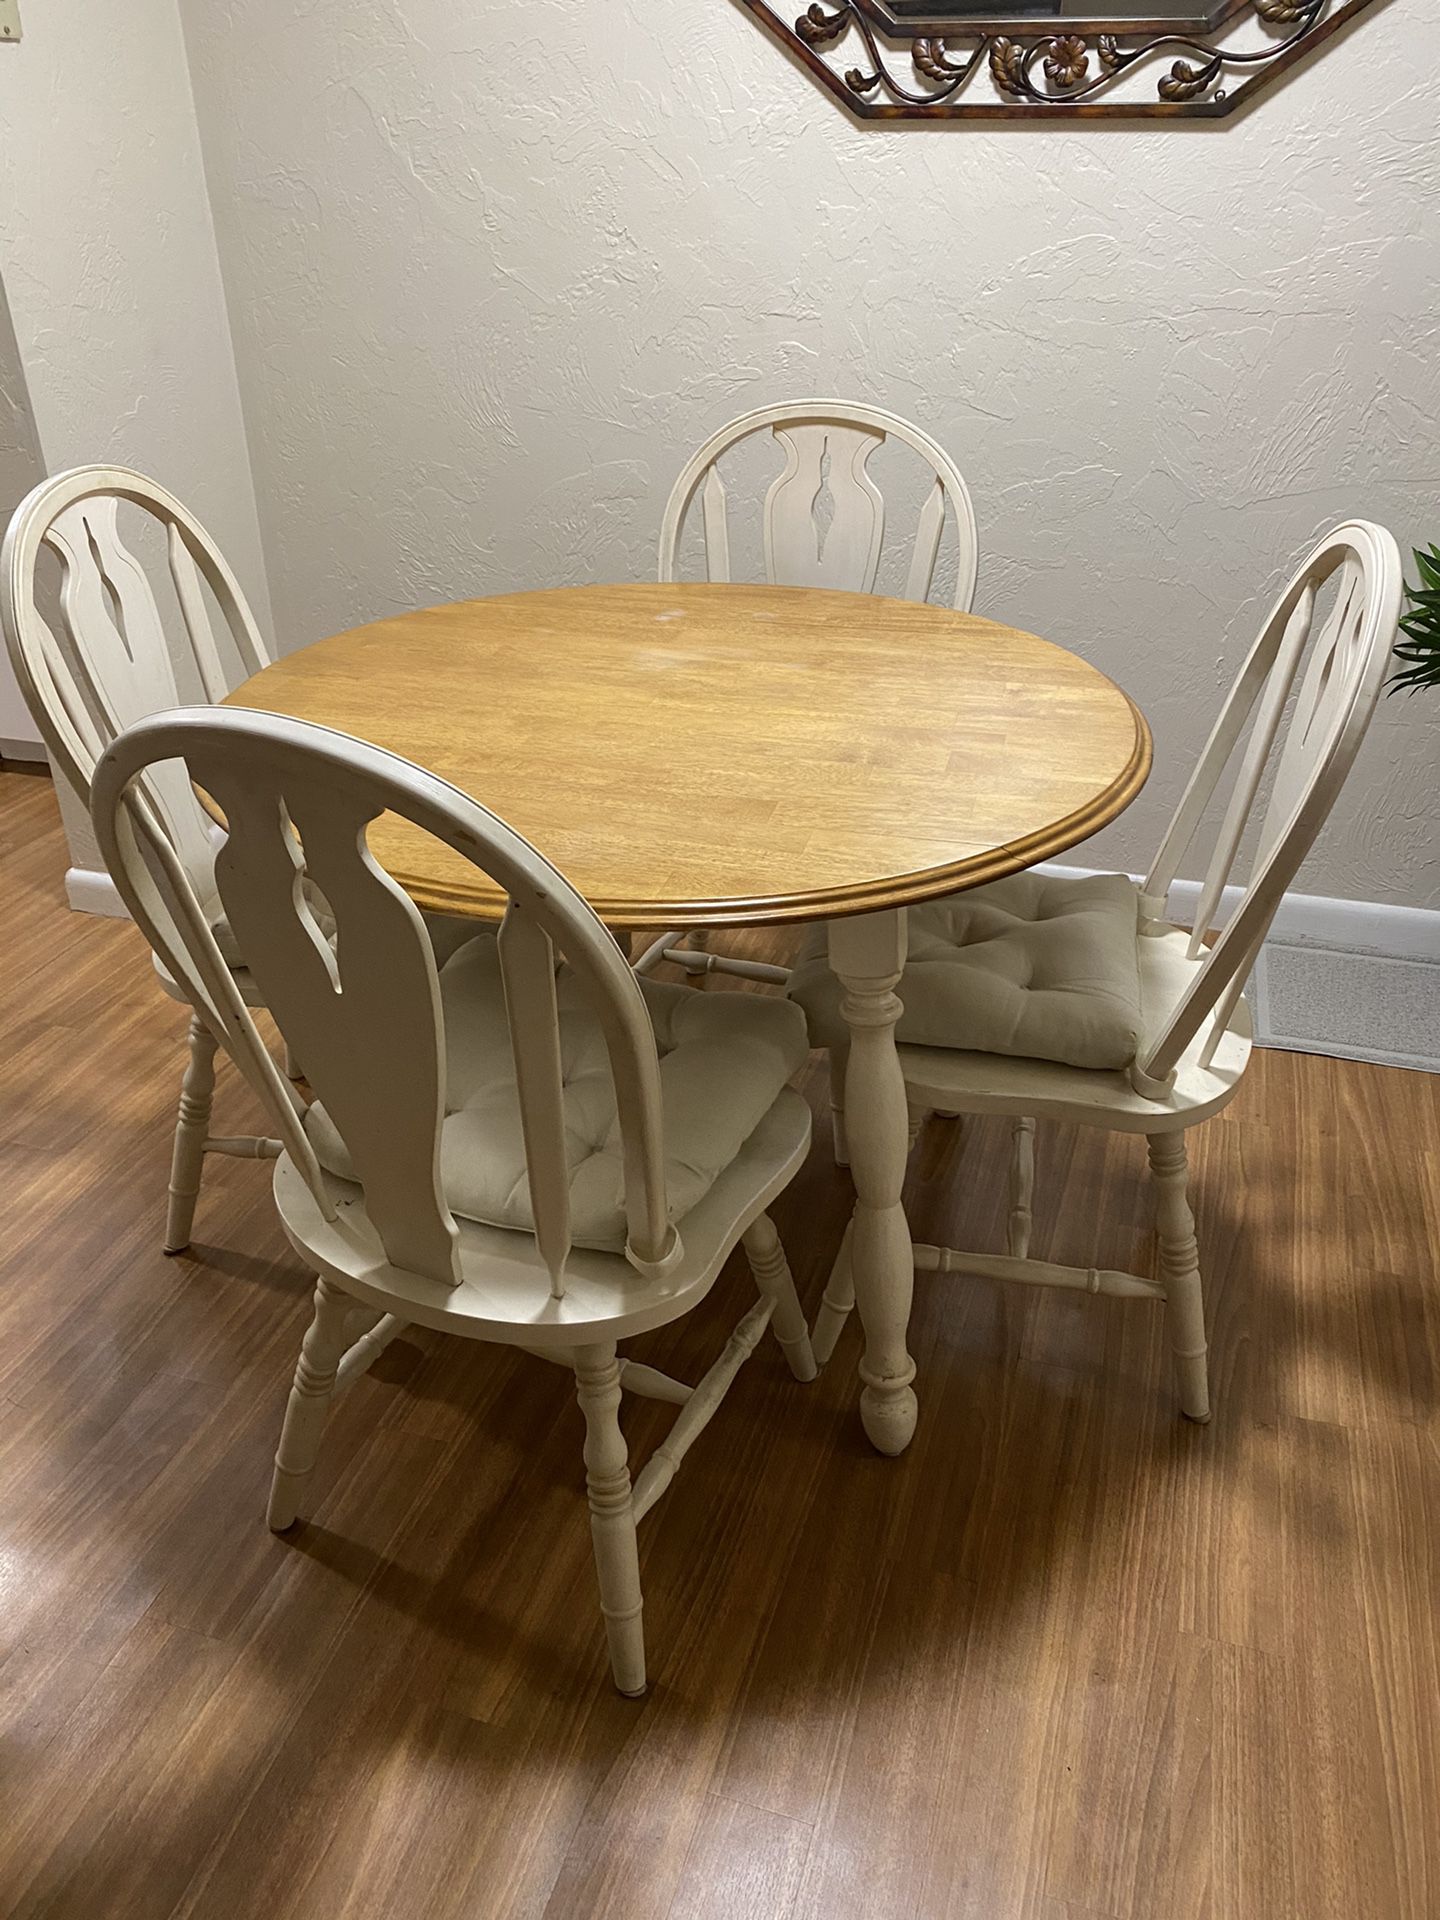 Small collapsible kitchen table and 4 chairs